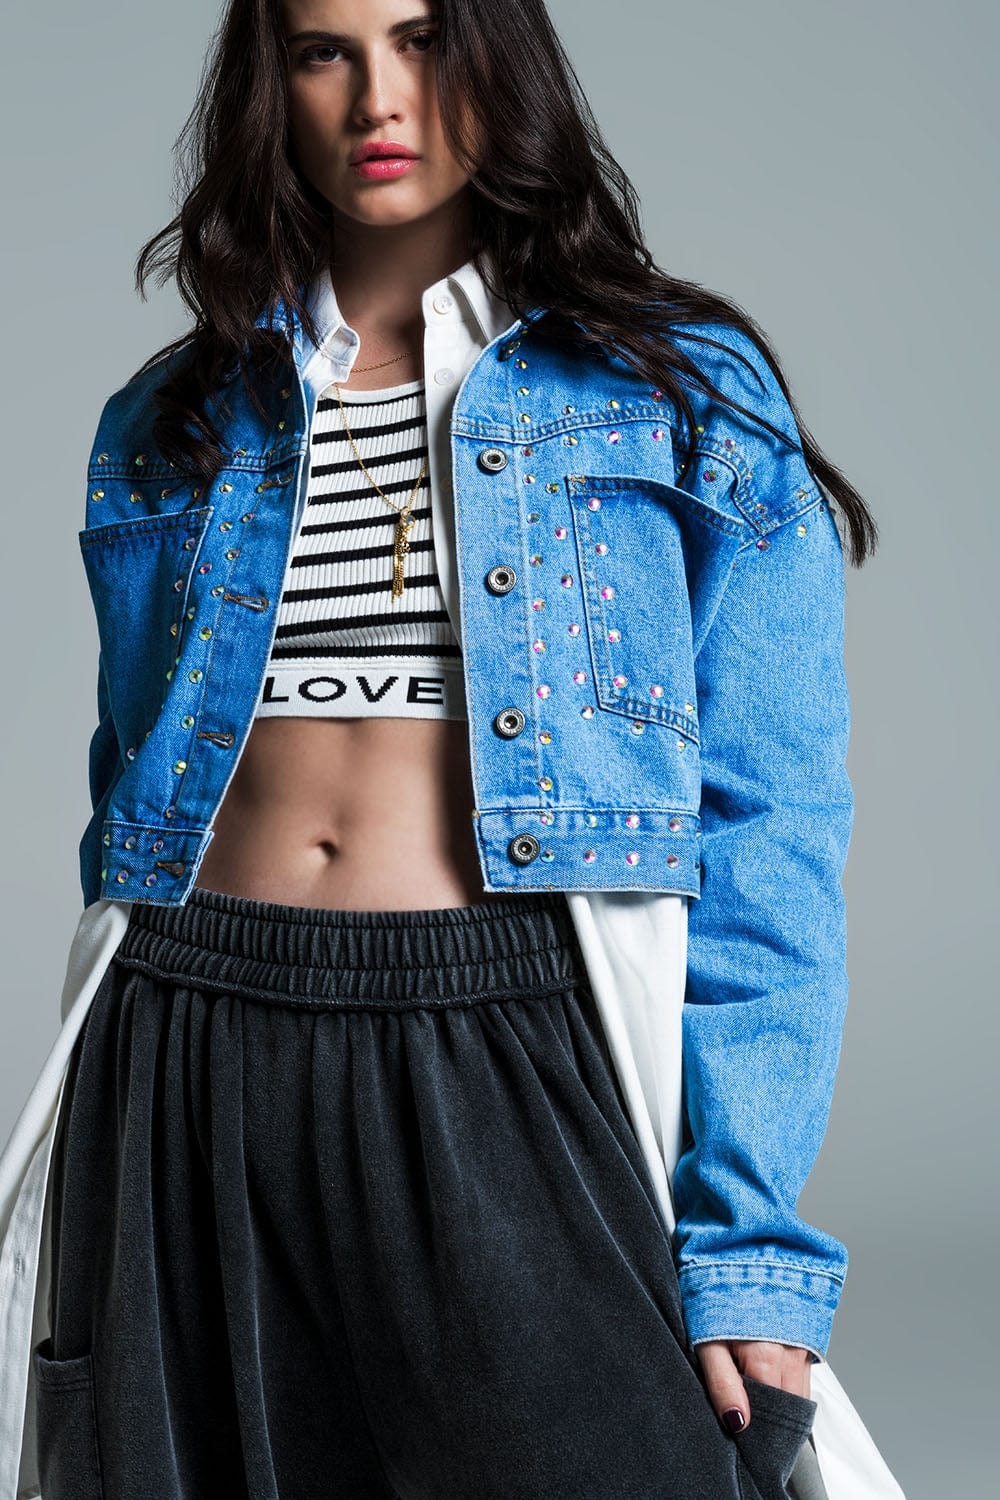 Q2 Women's Outerwear Denim Cropped Jacket In Blue With Studs And Chest Pockets